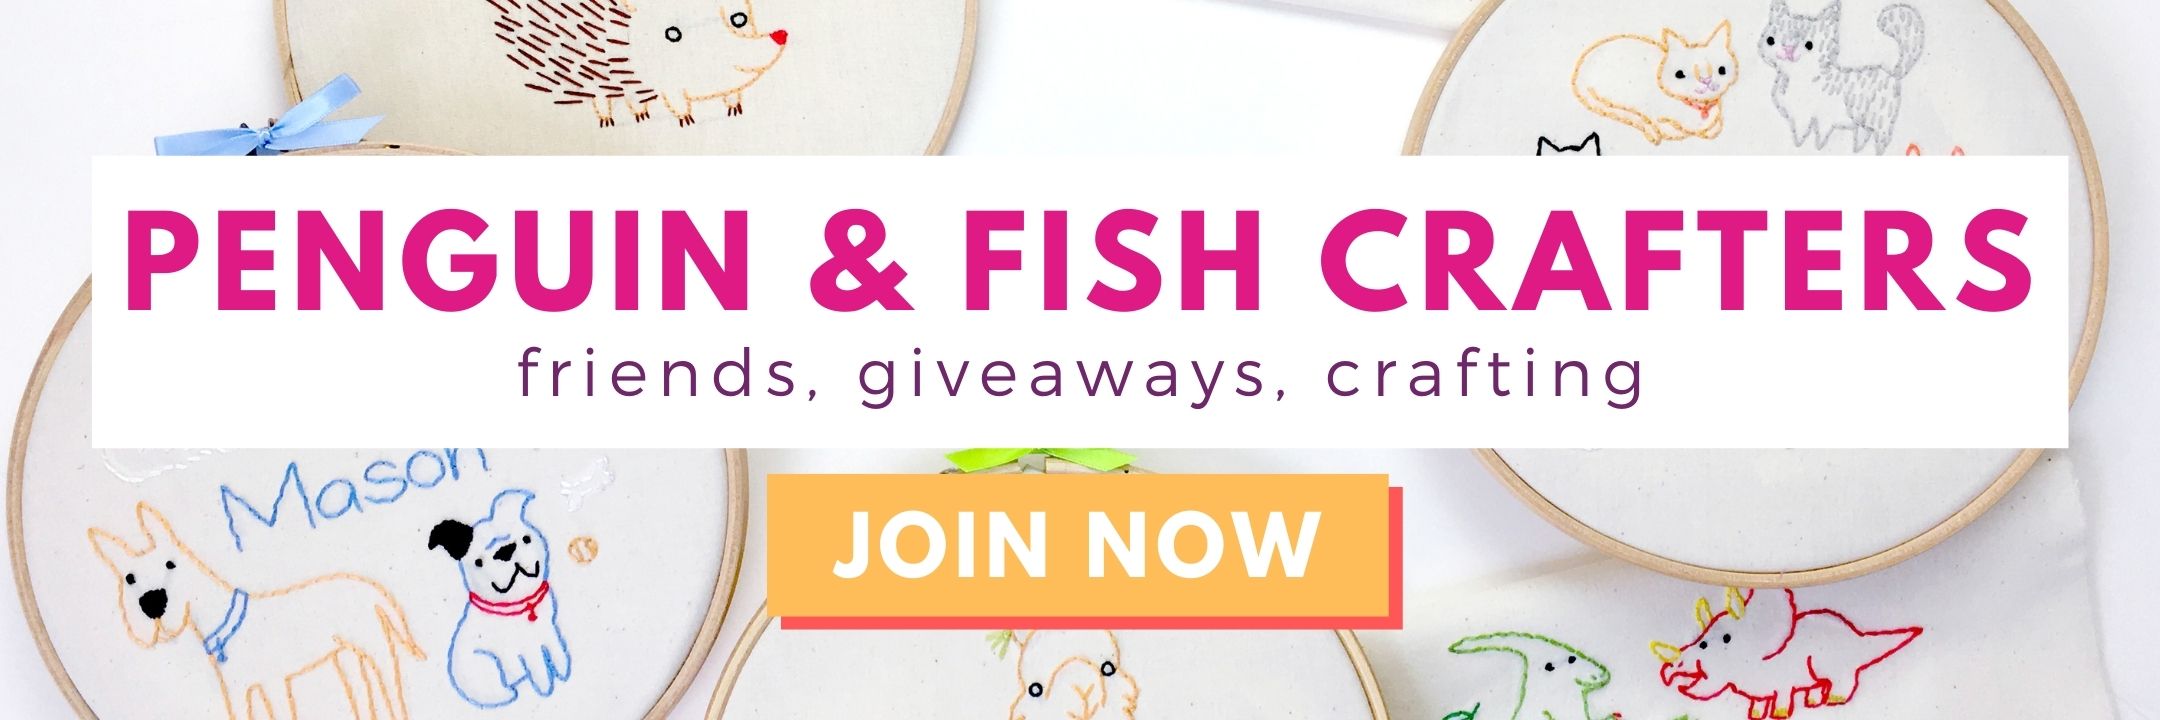 Private Facebook group, Penguin & Fish Crafters.